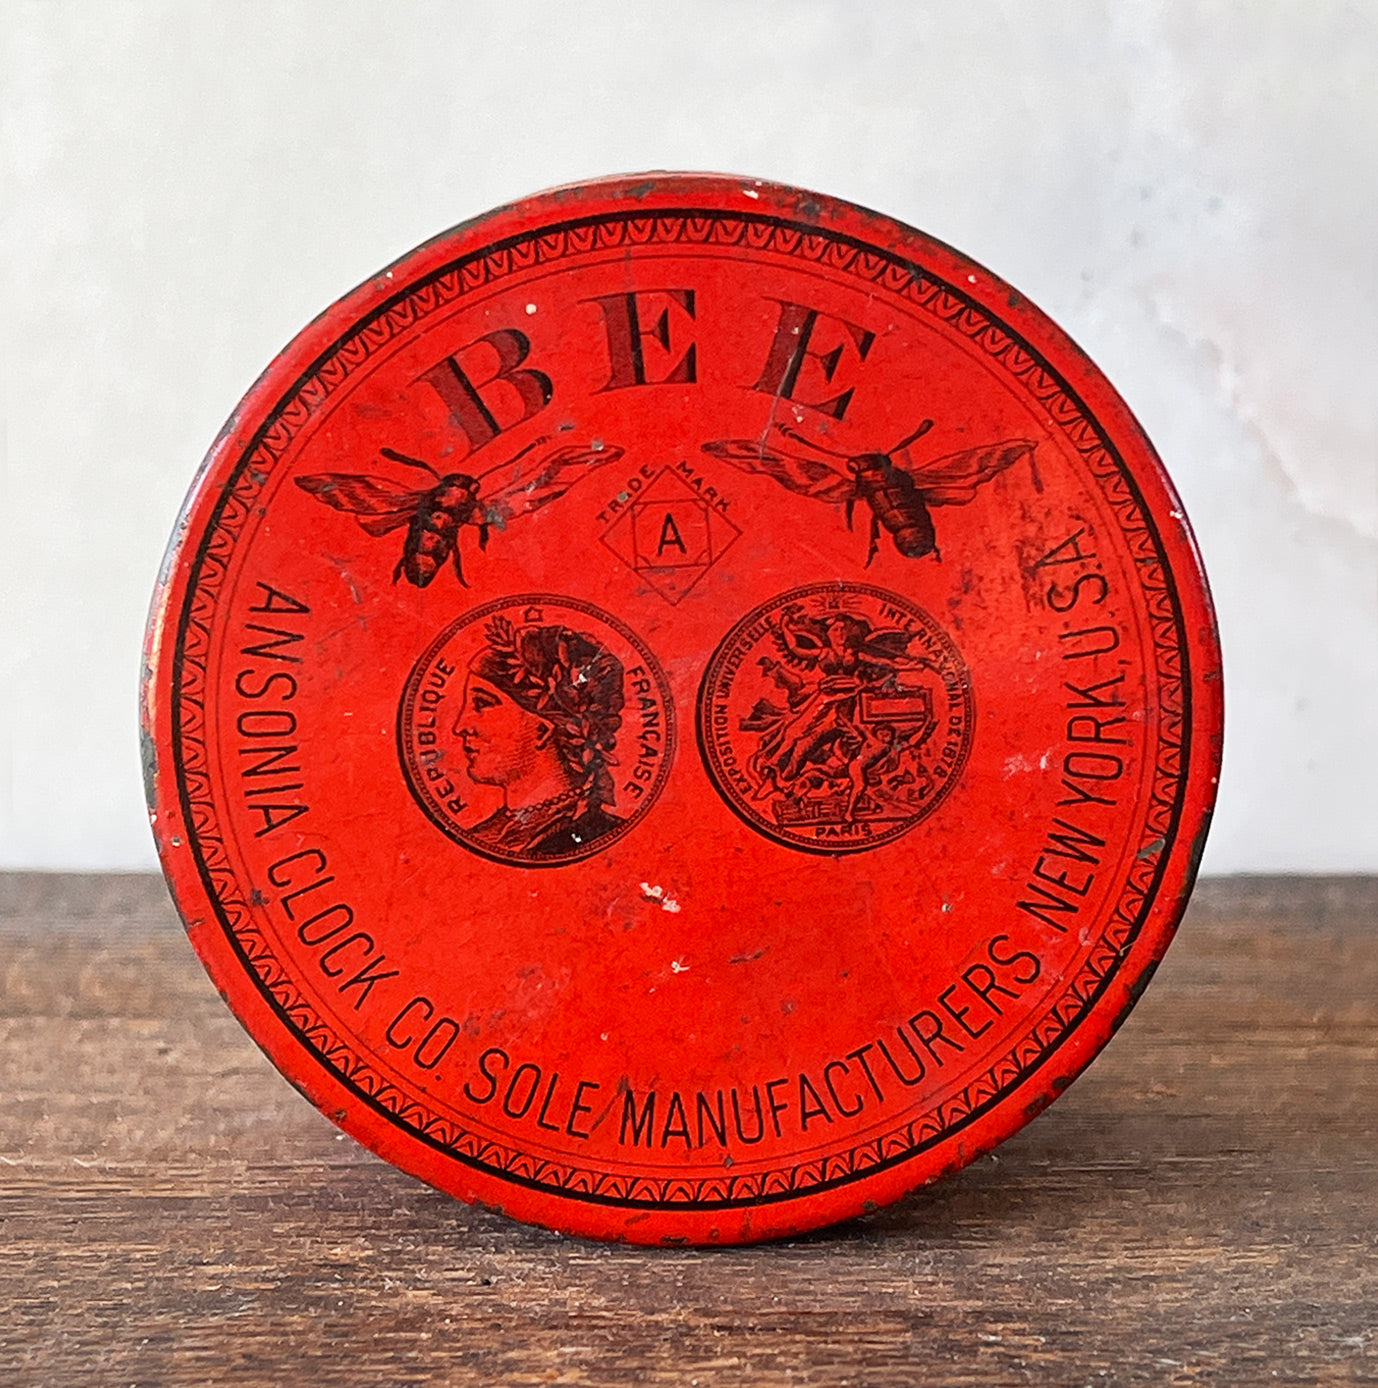 A sort after Vintage Anosonia Clock Tin by the Anisonia Clock Company of Brooklyn, New York. The tin was used to house the 'BEE' clock which required no key, all you had to do was twist its back - SHOP NOW - www.intovintage.co.uk